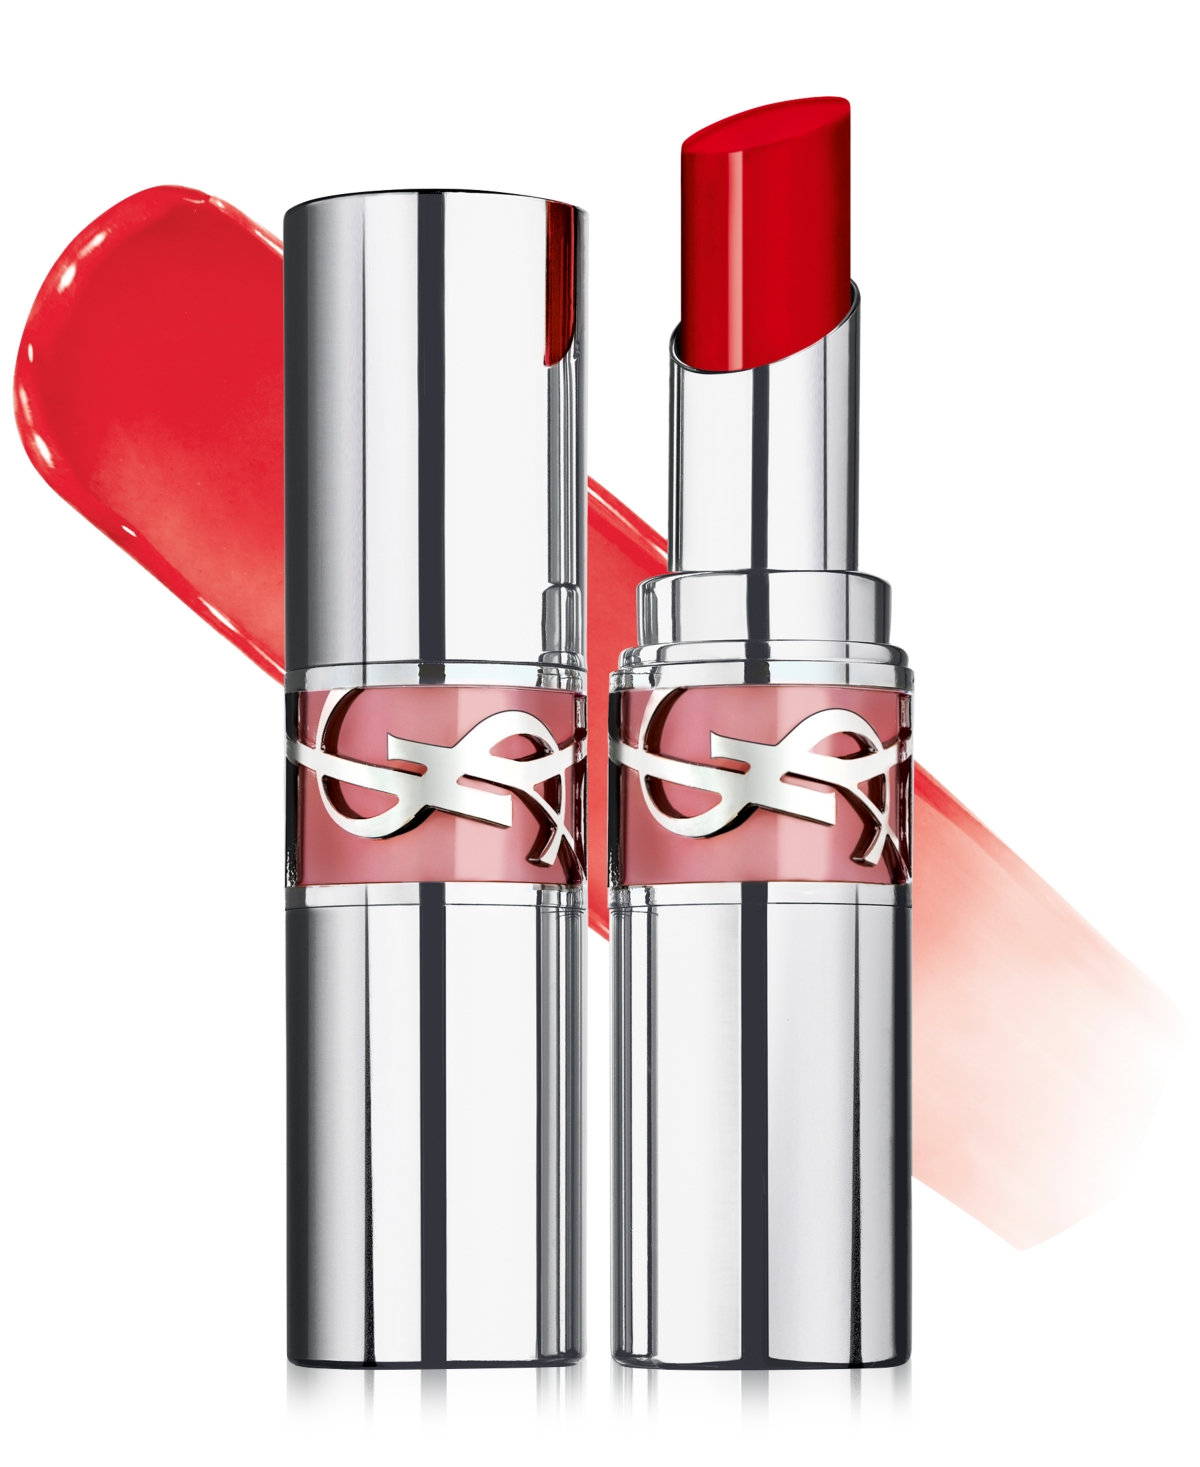 Saint Laurent Loveshine Lip Oil Stick In Passion Red - Warm Red